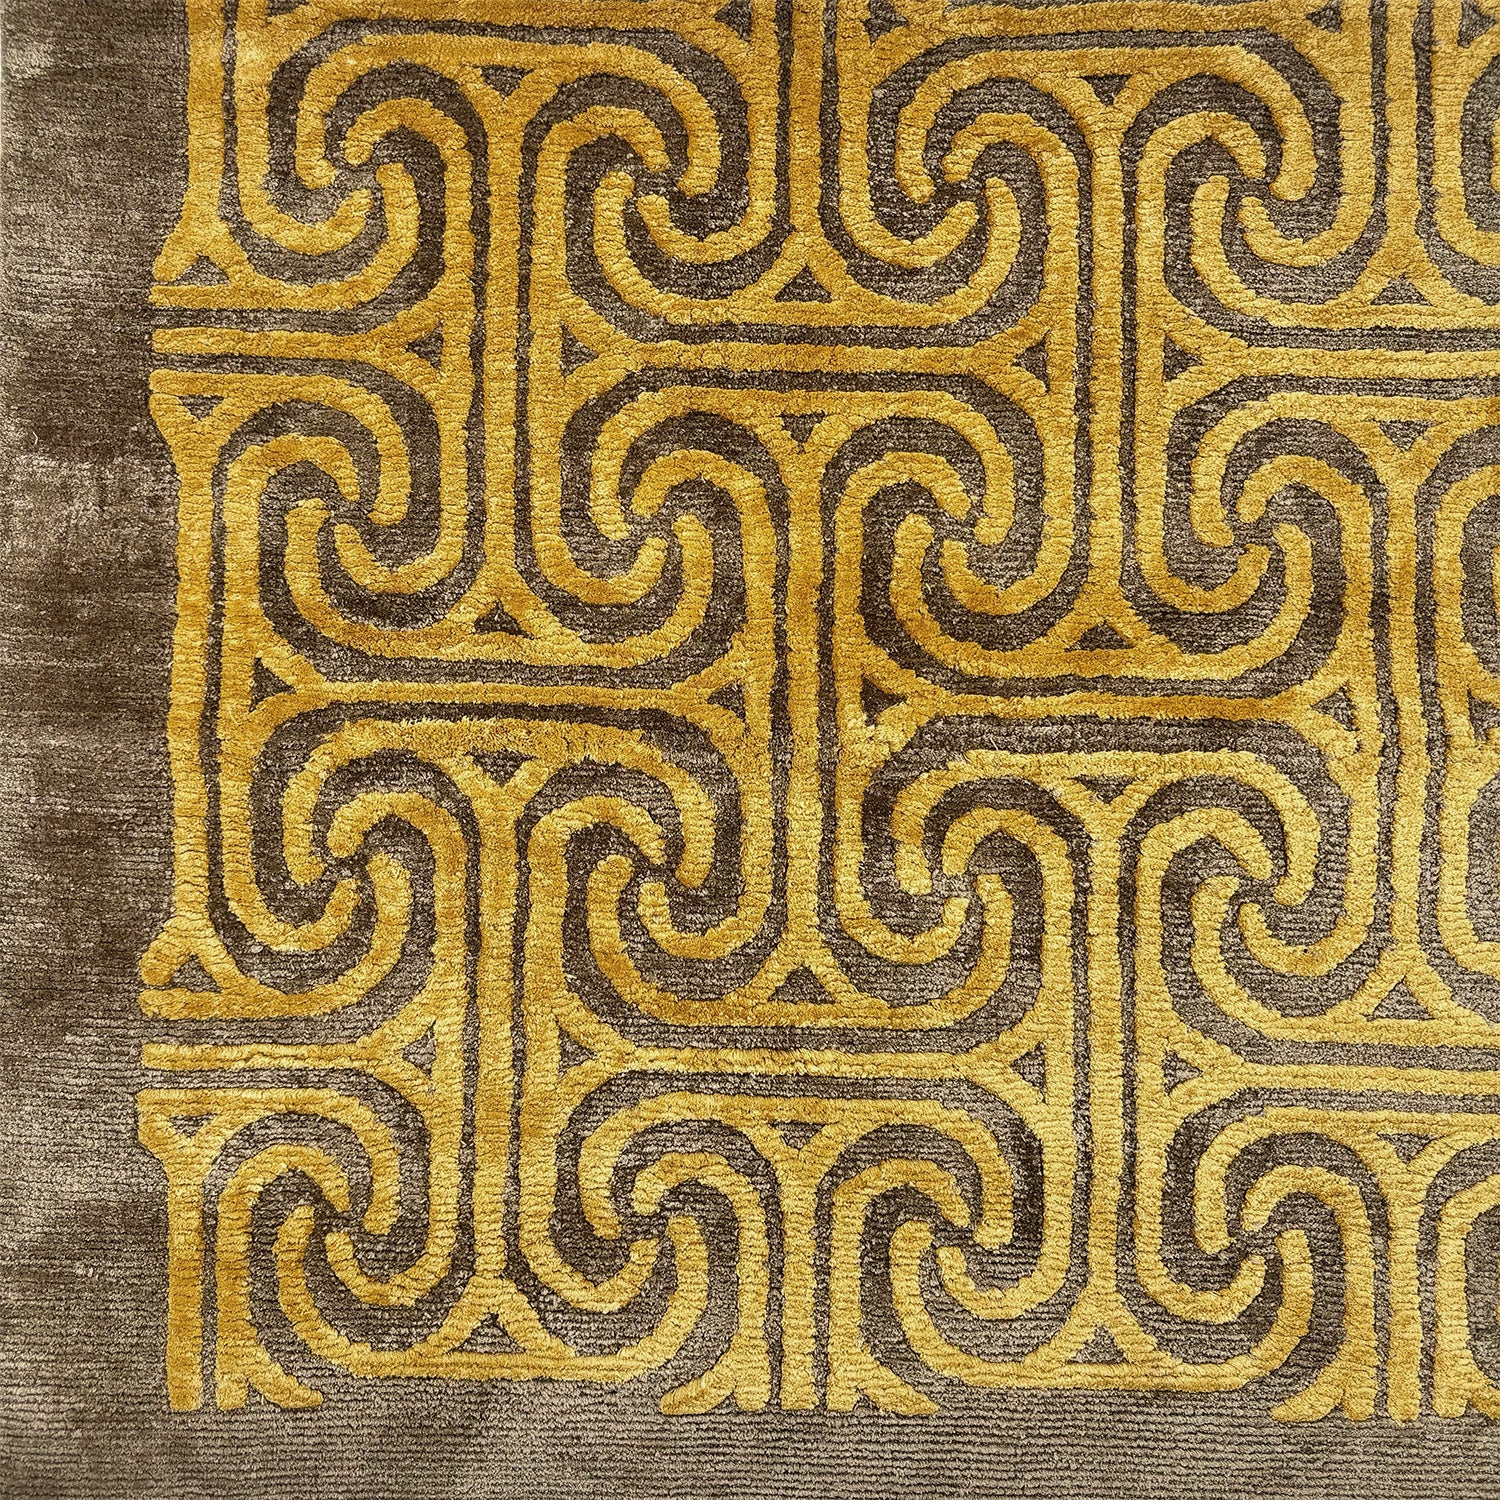 Detail of a handkotted rug in a classic greek key pattern in yellow on a brown field